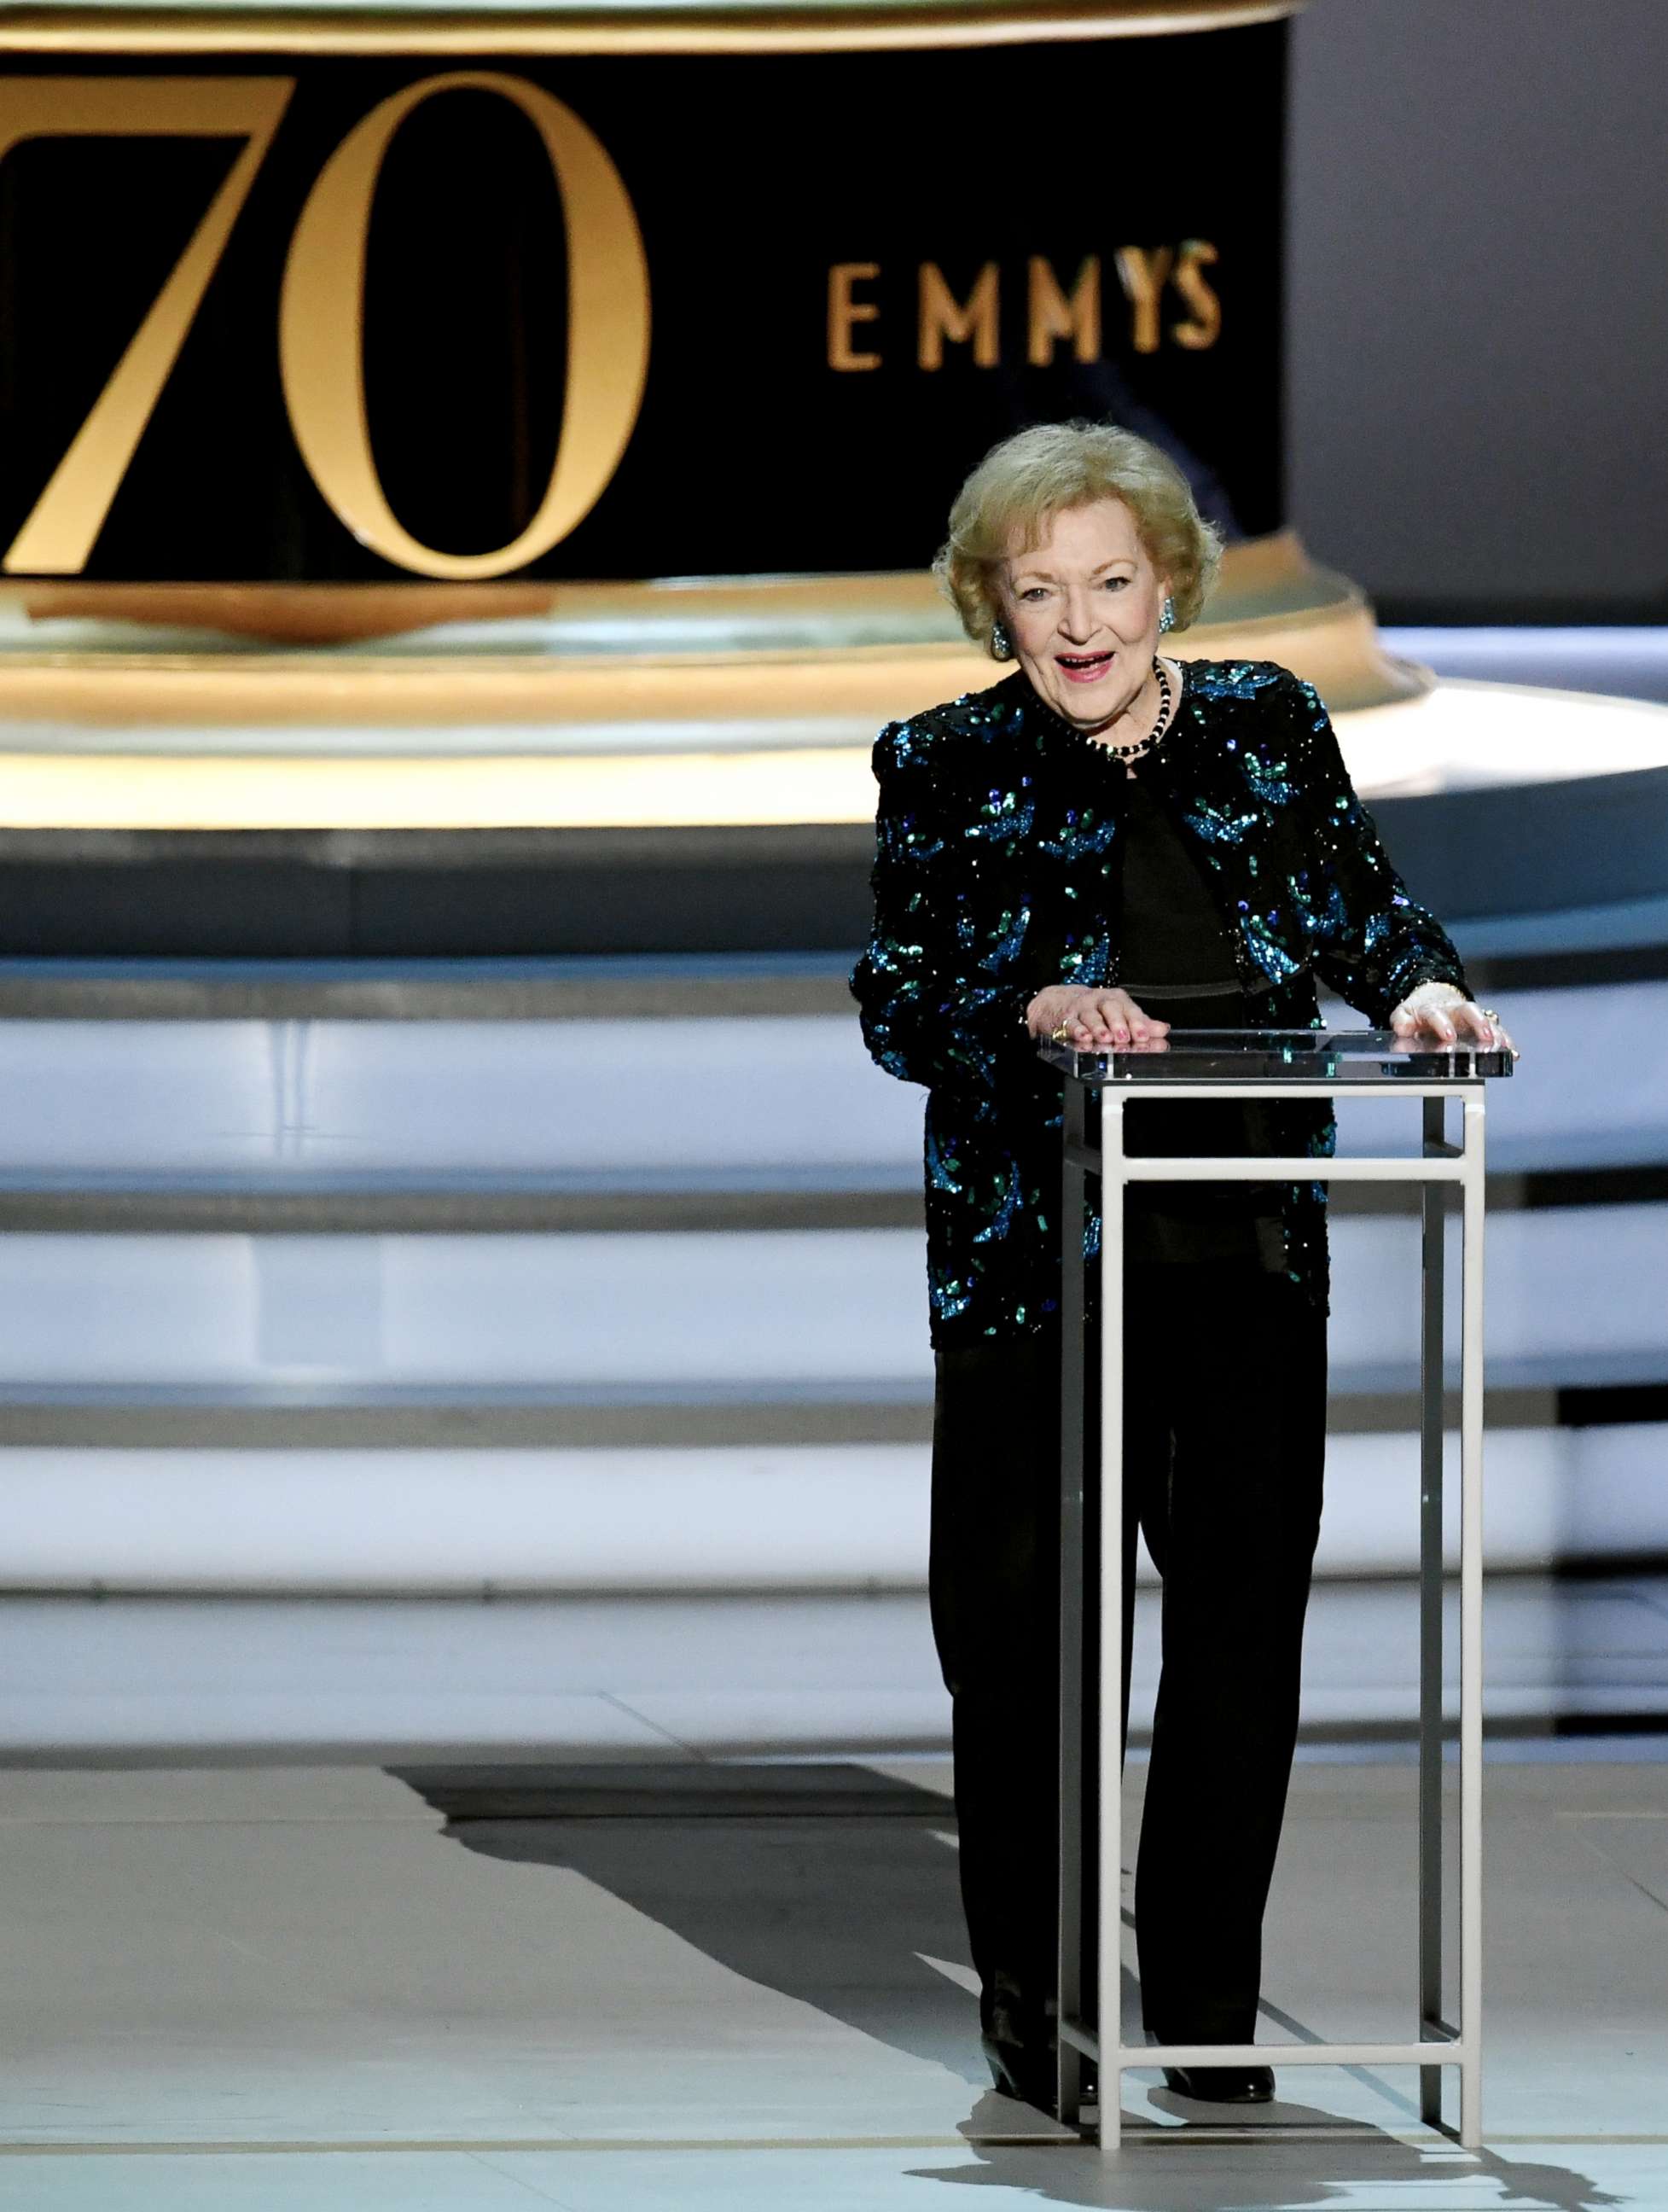 PHOTO: Betty White speaks during the 70th Emmy Awards on Sept. 17, 2018, in Los Angeles.